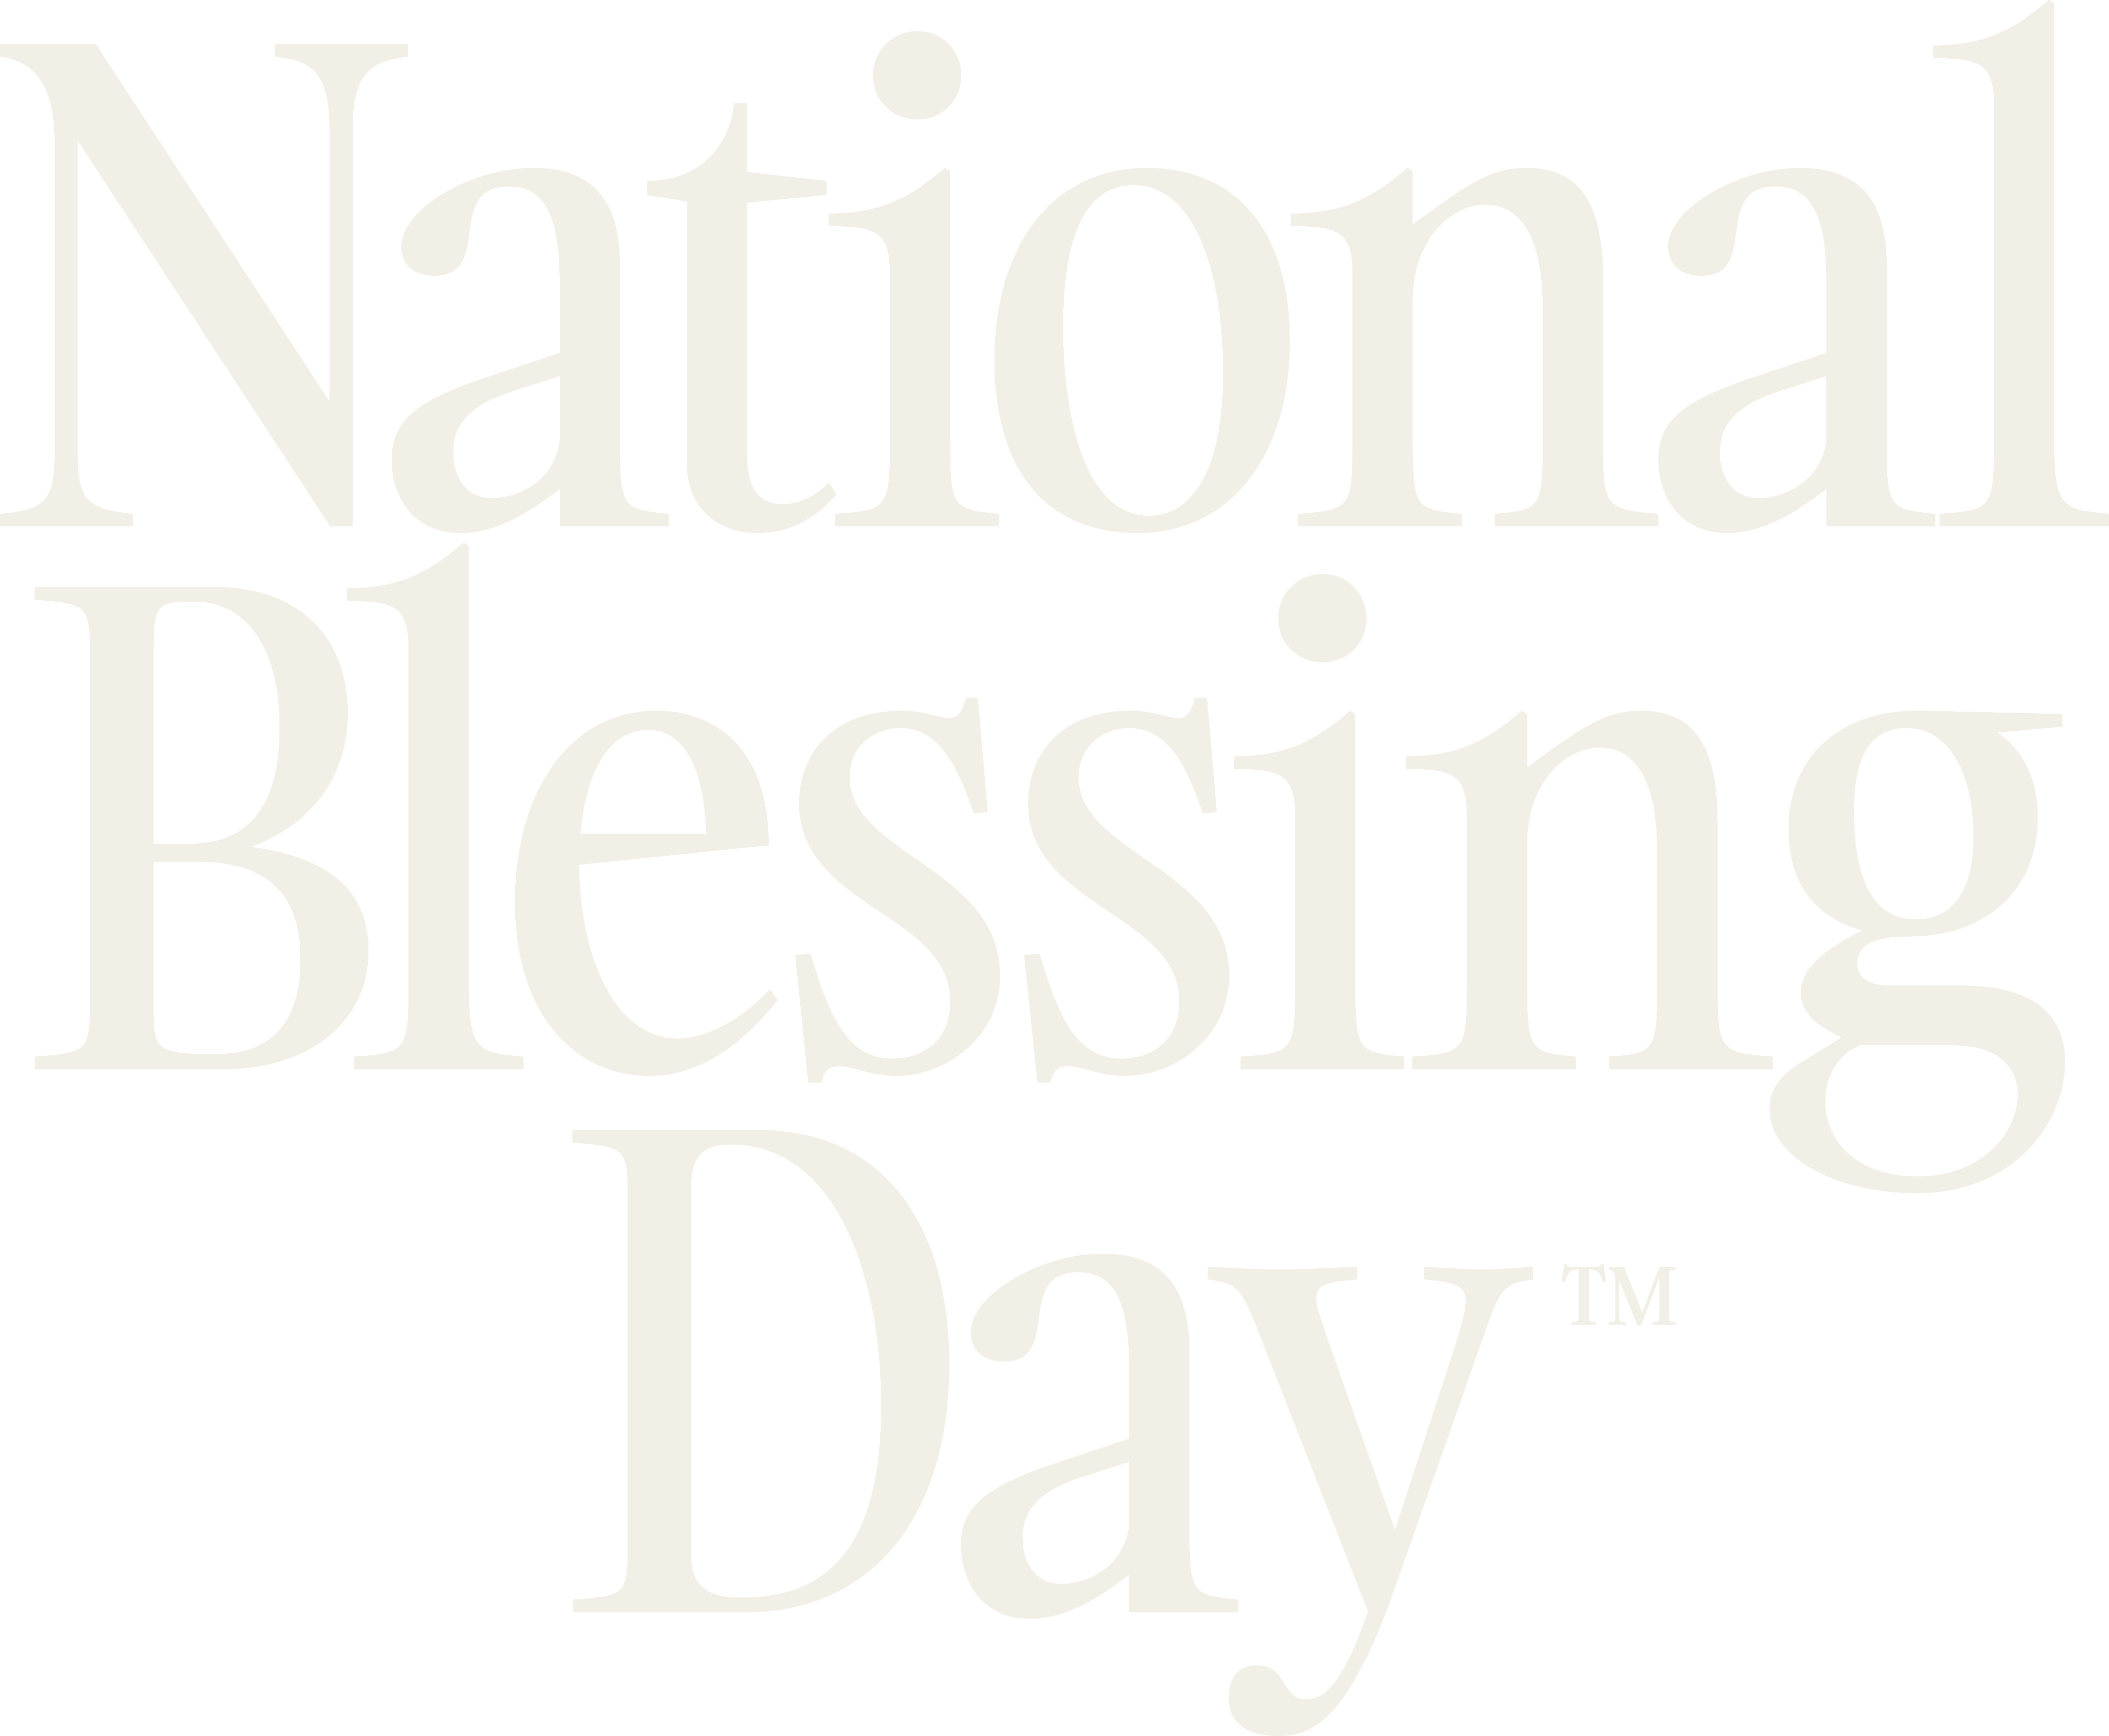 National Blessing Day Logo and link to homepage